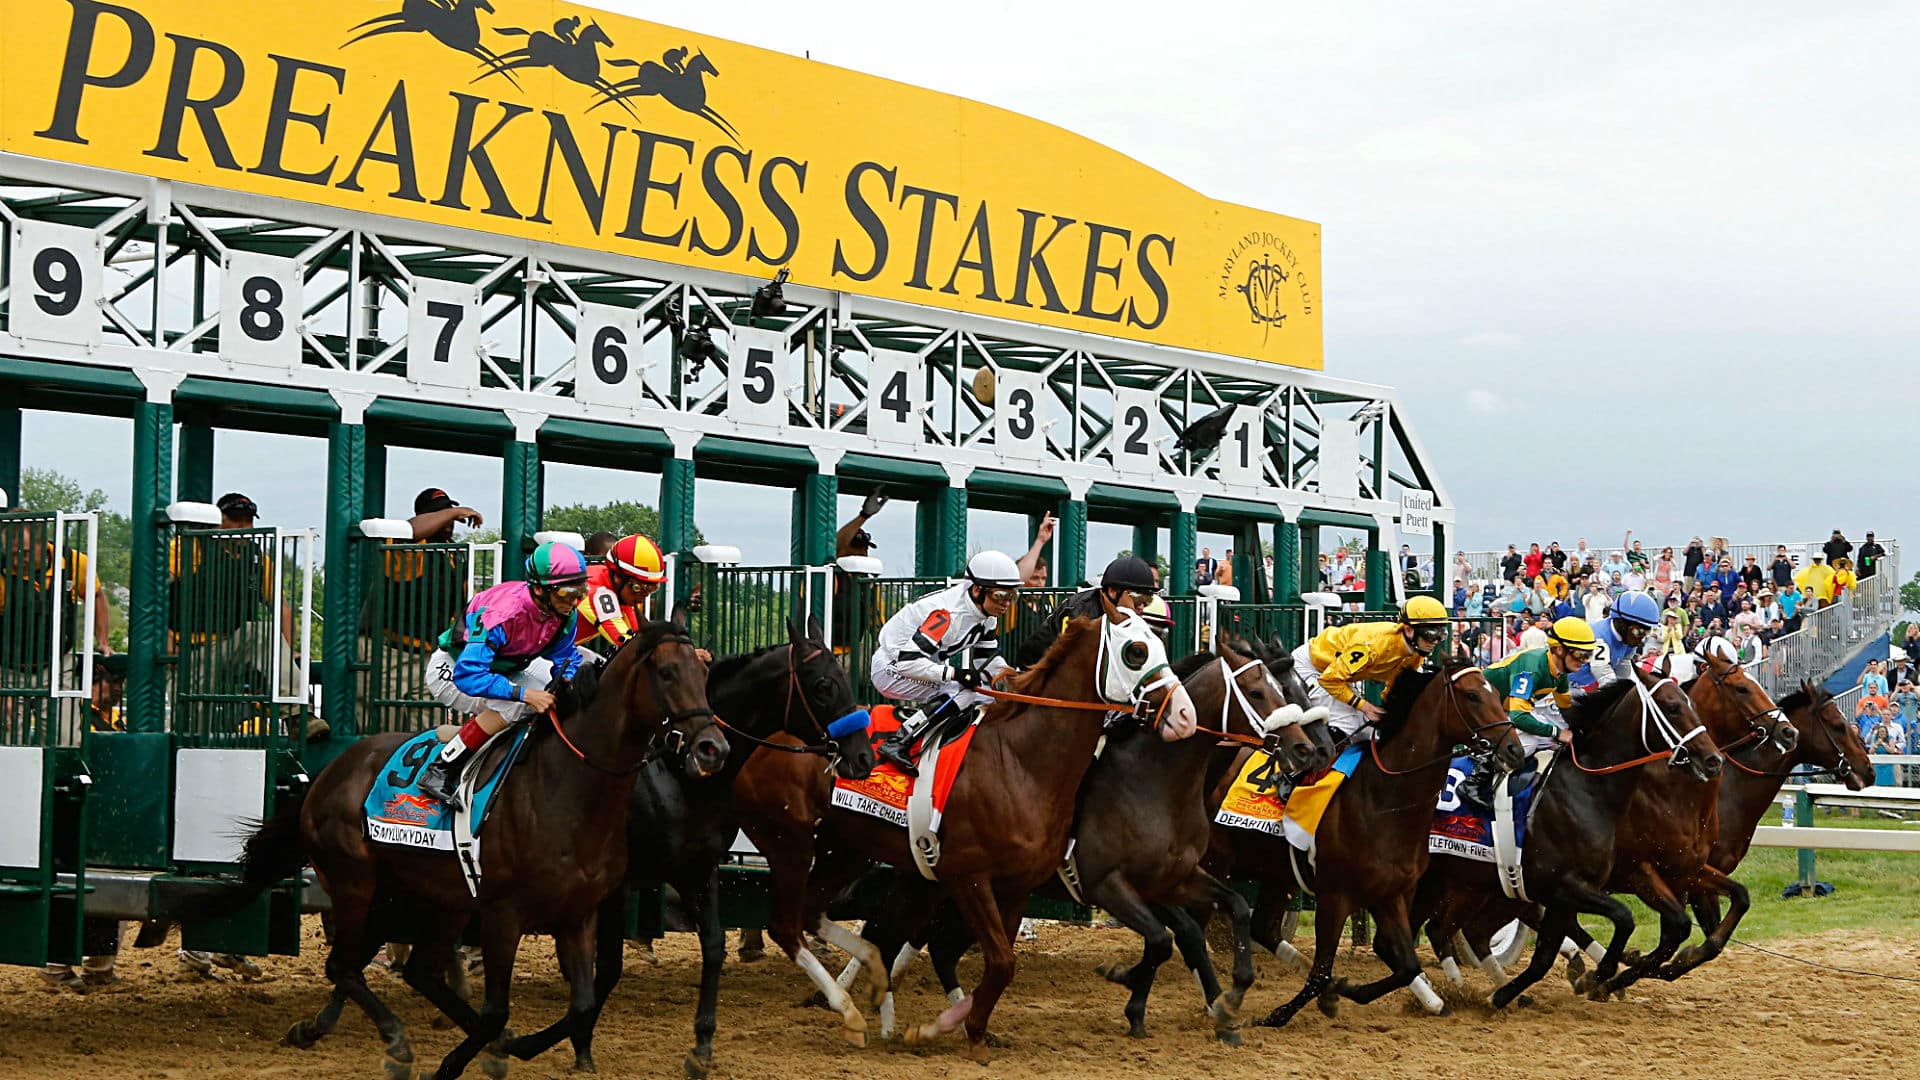 What time is preakness